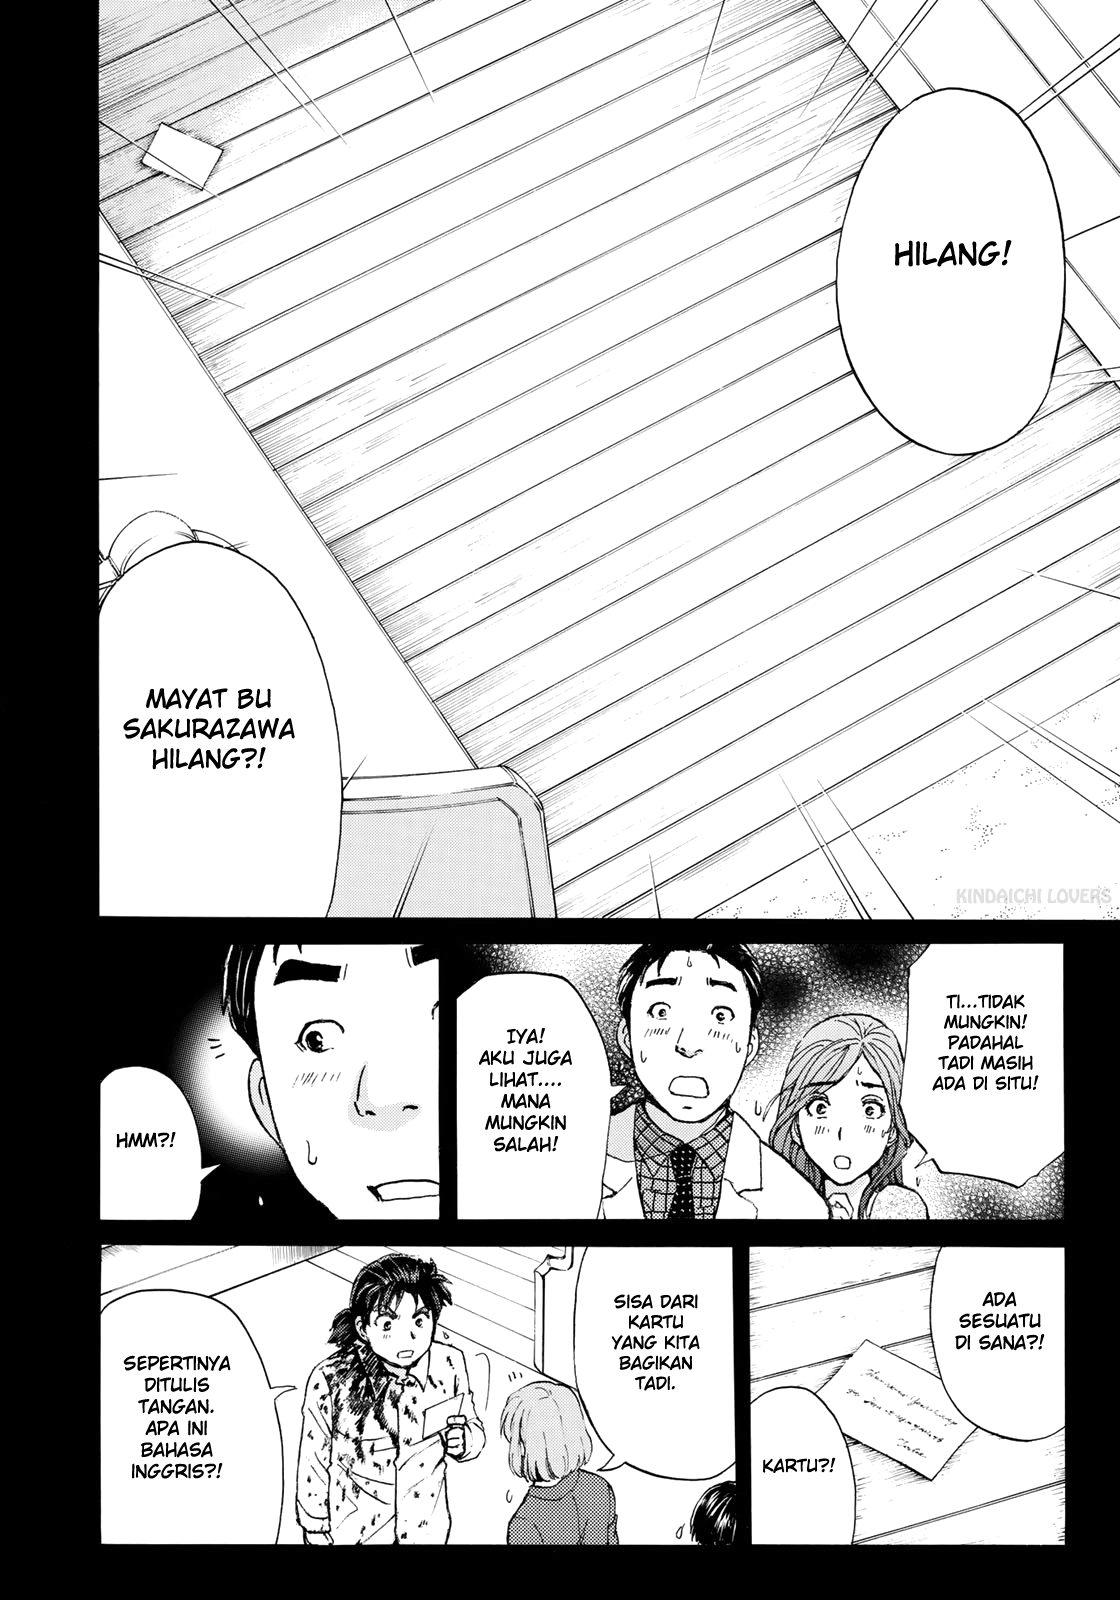 37 Year Old Kindaichi Case Files Chapter 4